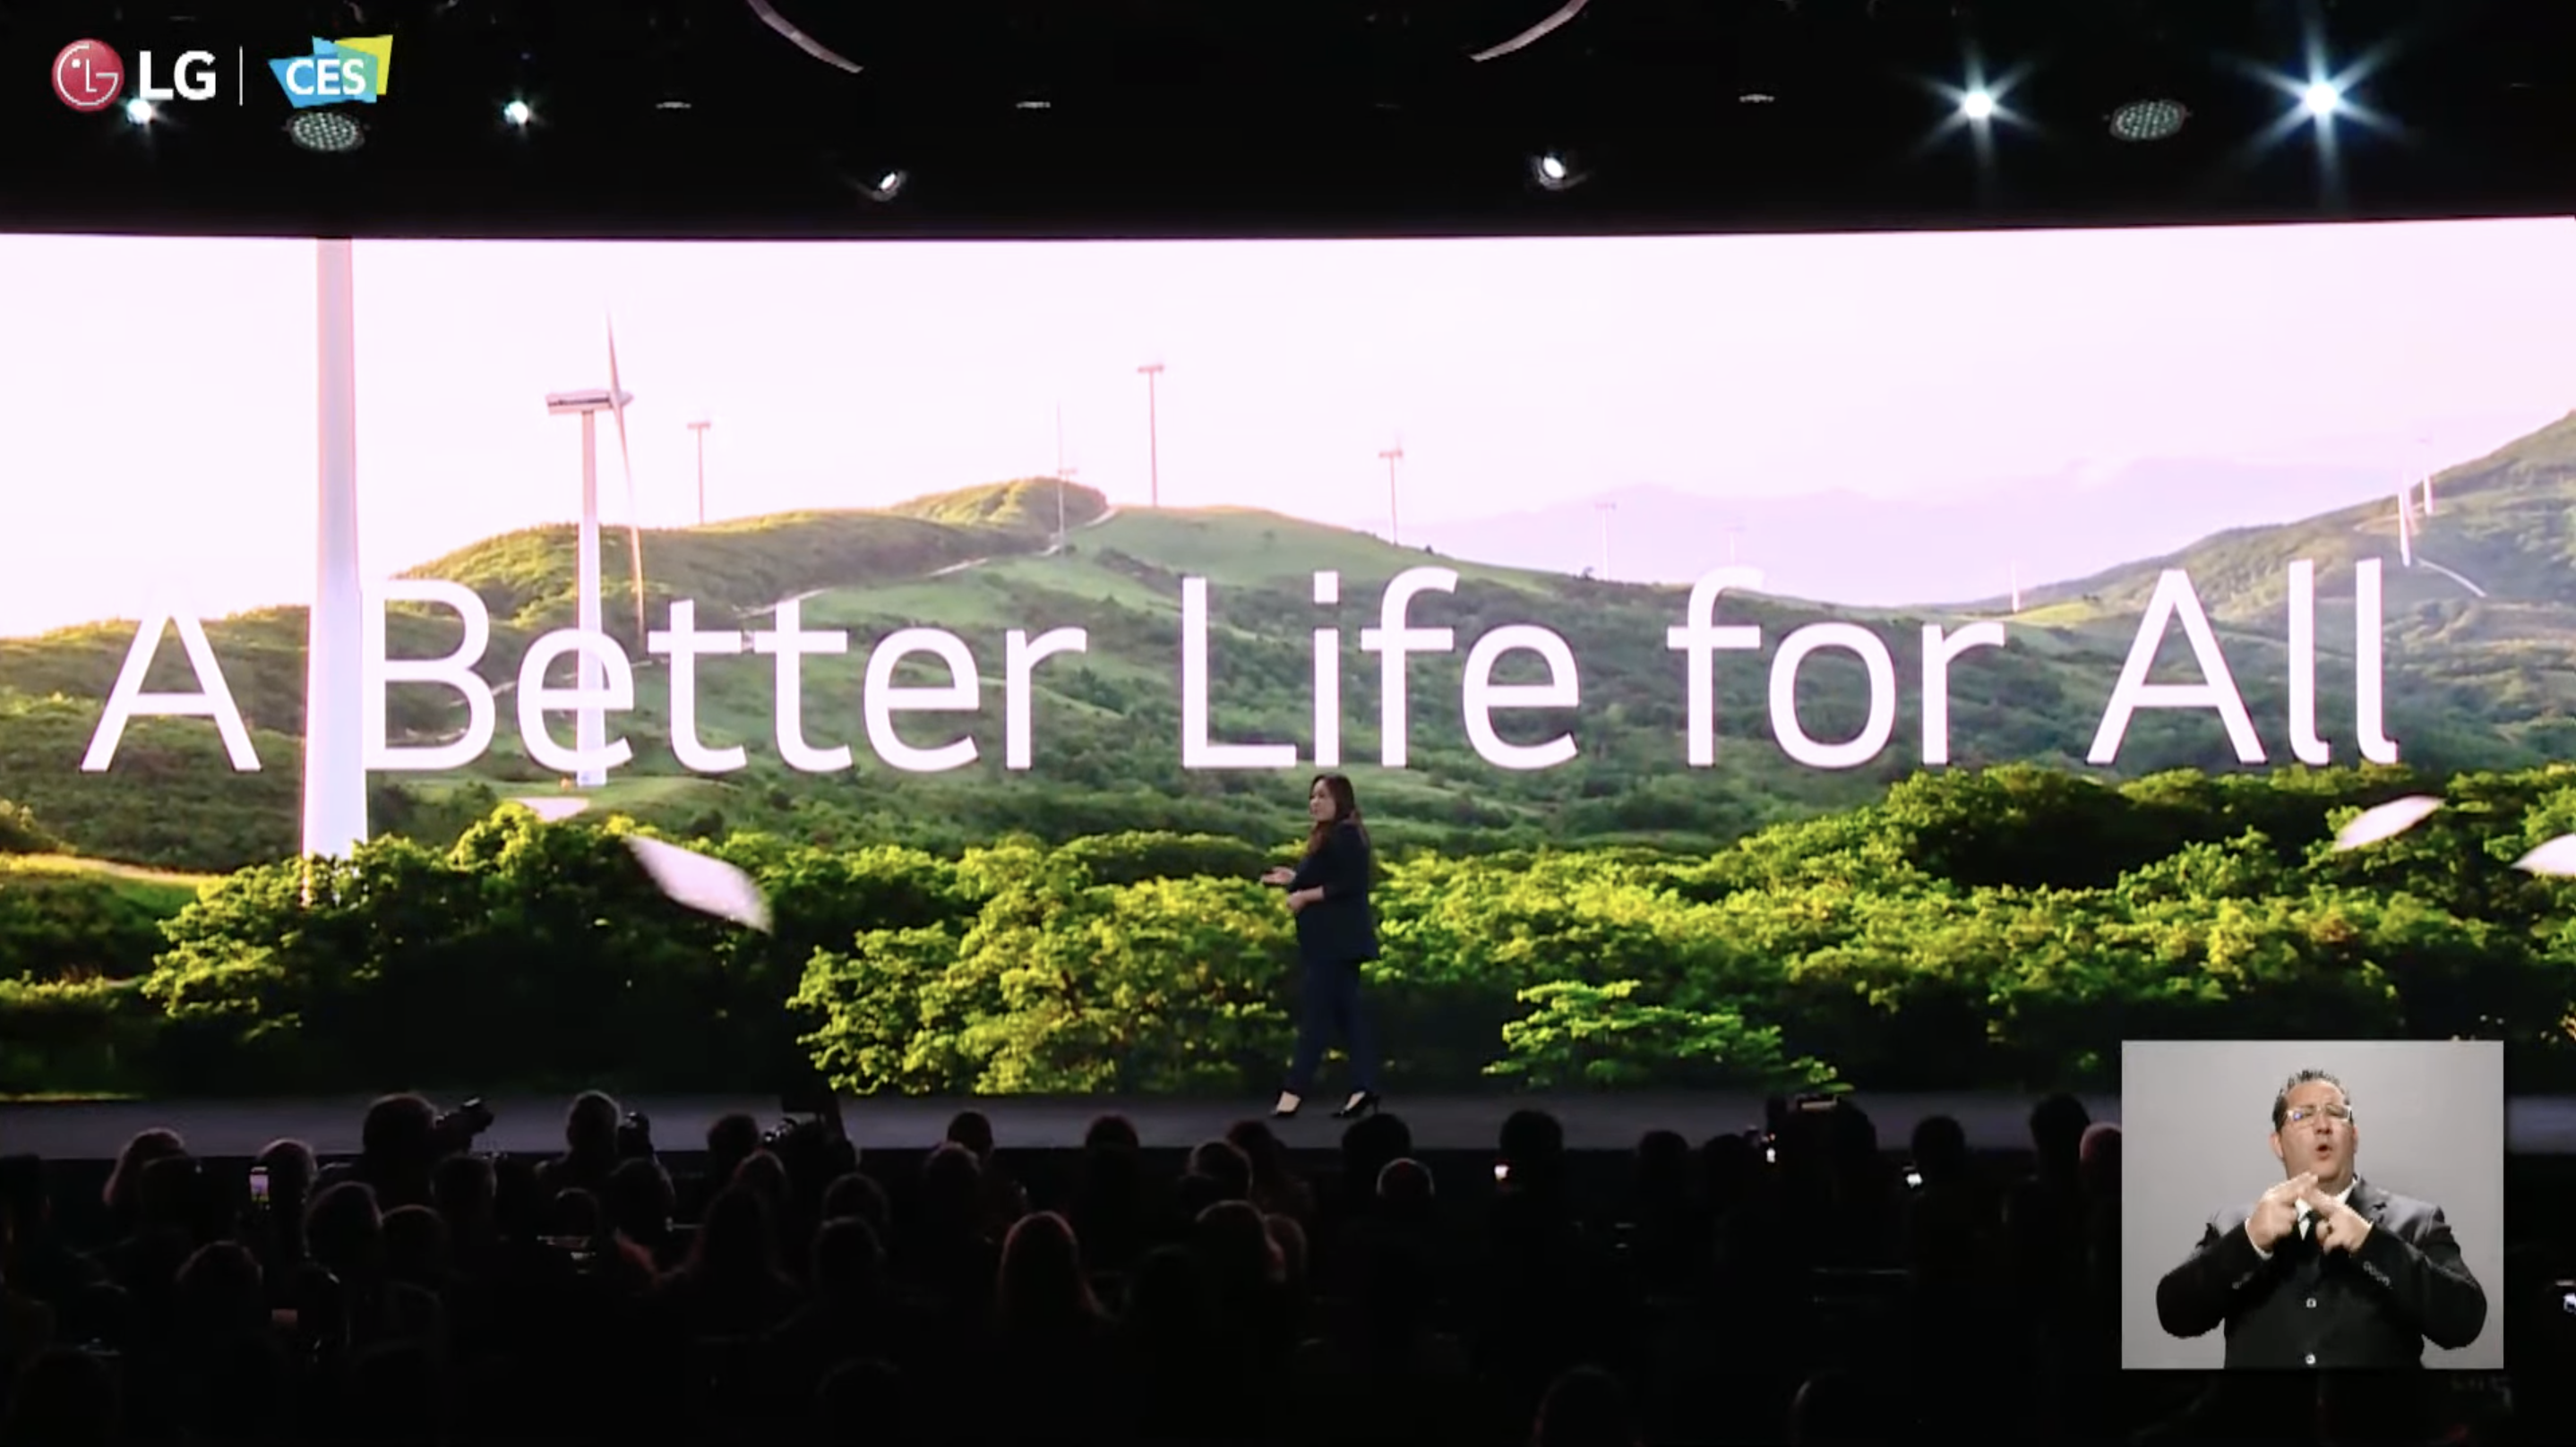 An image from LG's CES 2023 keynote